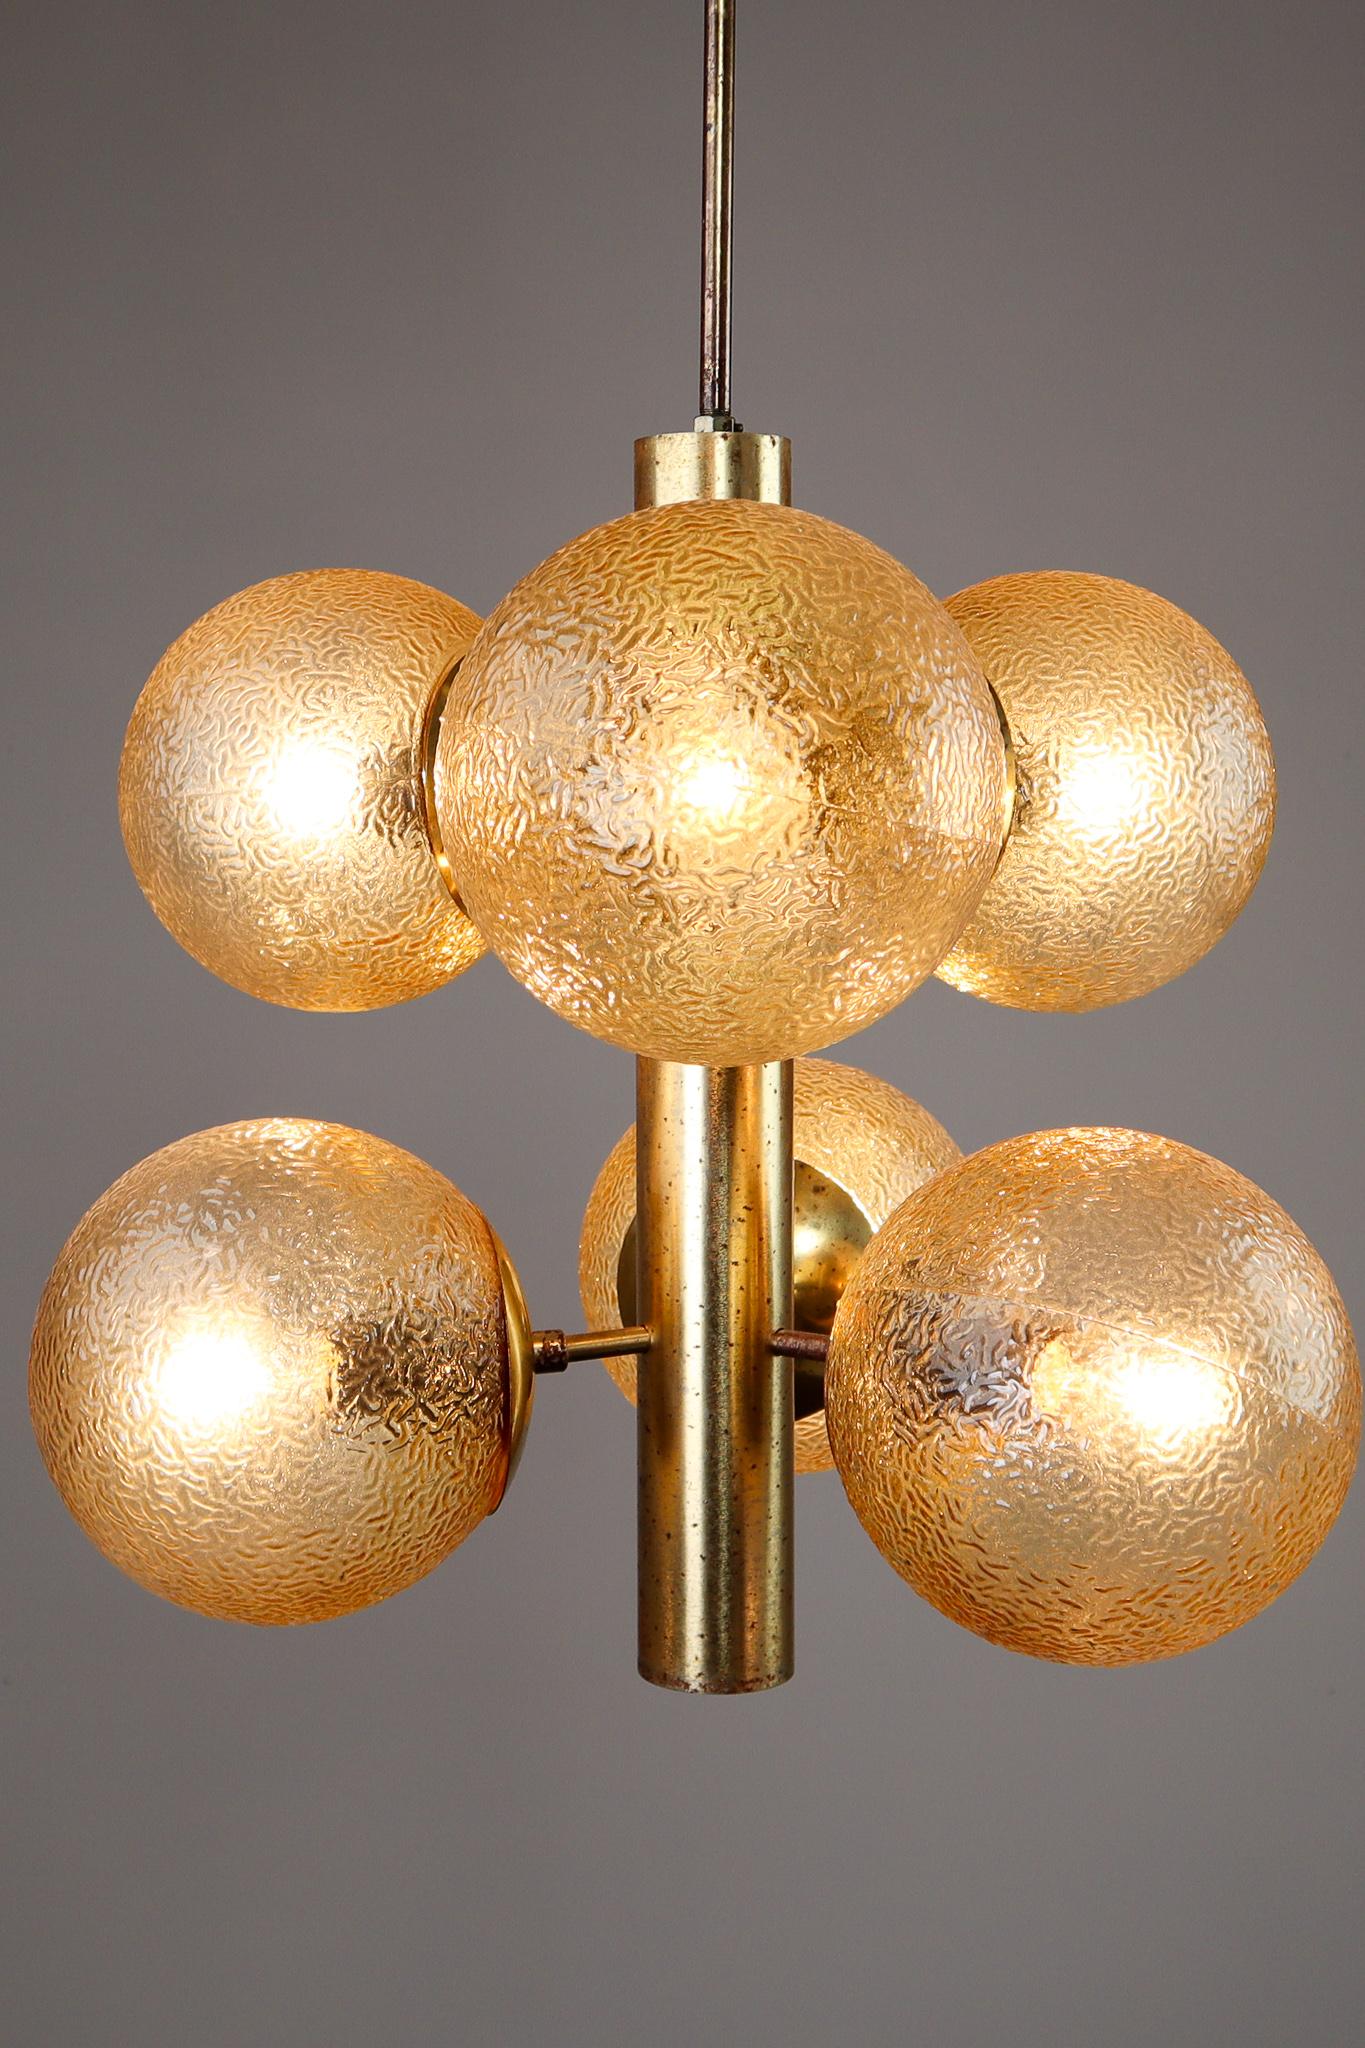 Stunning Sputnik chandelier with 6 handmade glass globes and patinated brass by Kaiser Leuchten, Germany, 1960s. This chandelier will contribute to a luxurious character of the (hotel-bar) interior. Very good vintage condition without damages. 100%